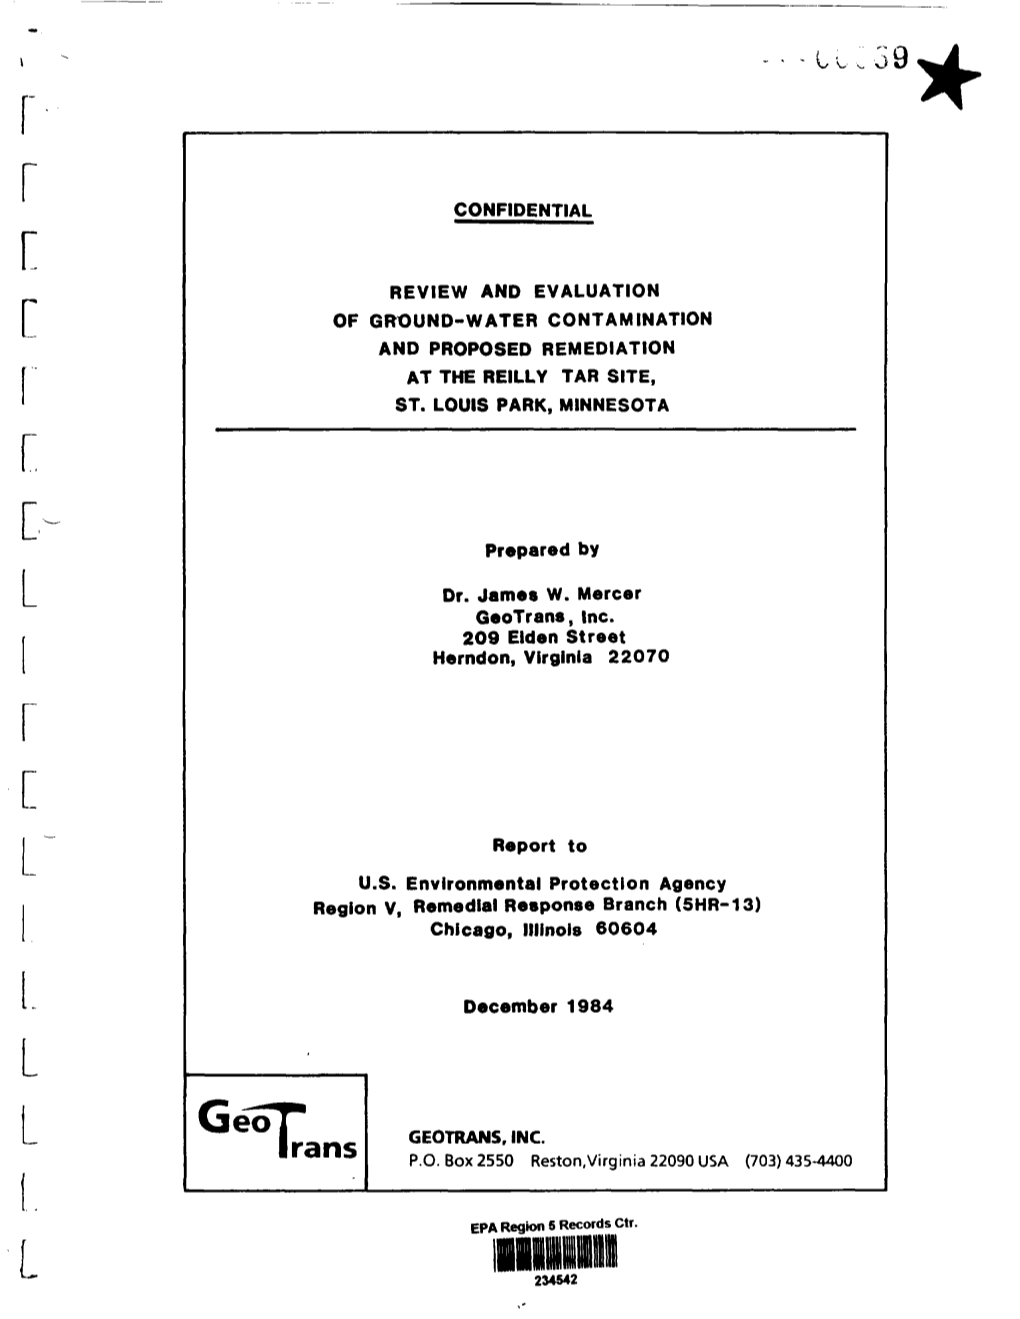 Review & Evaluation of Groundwater Contamination & Proposed Remediation